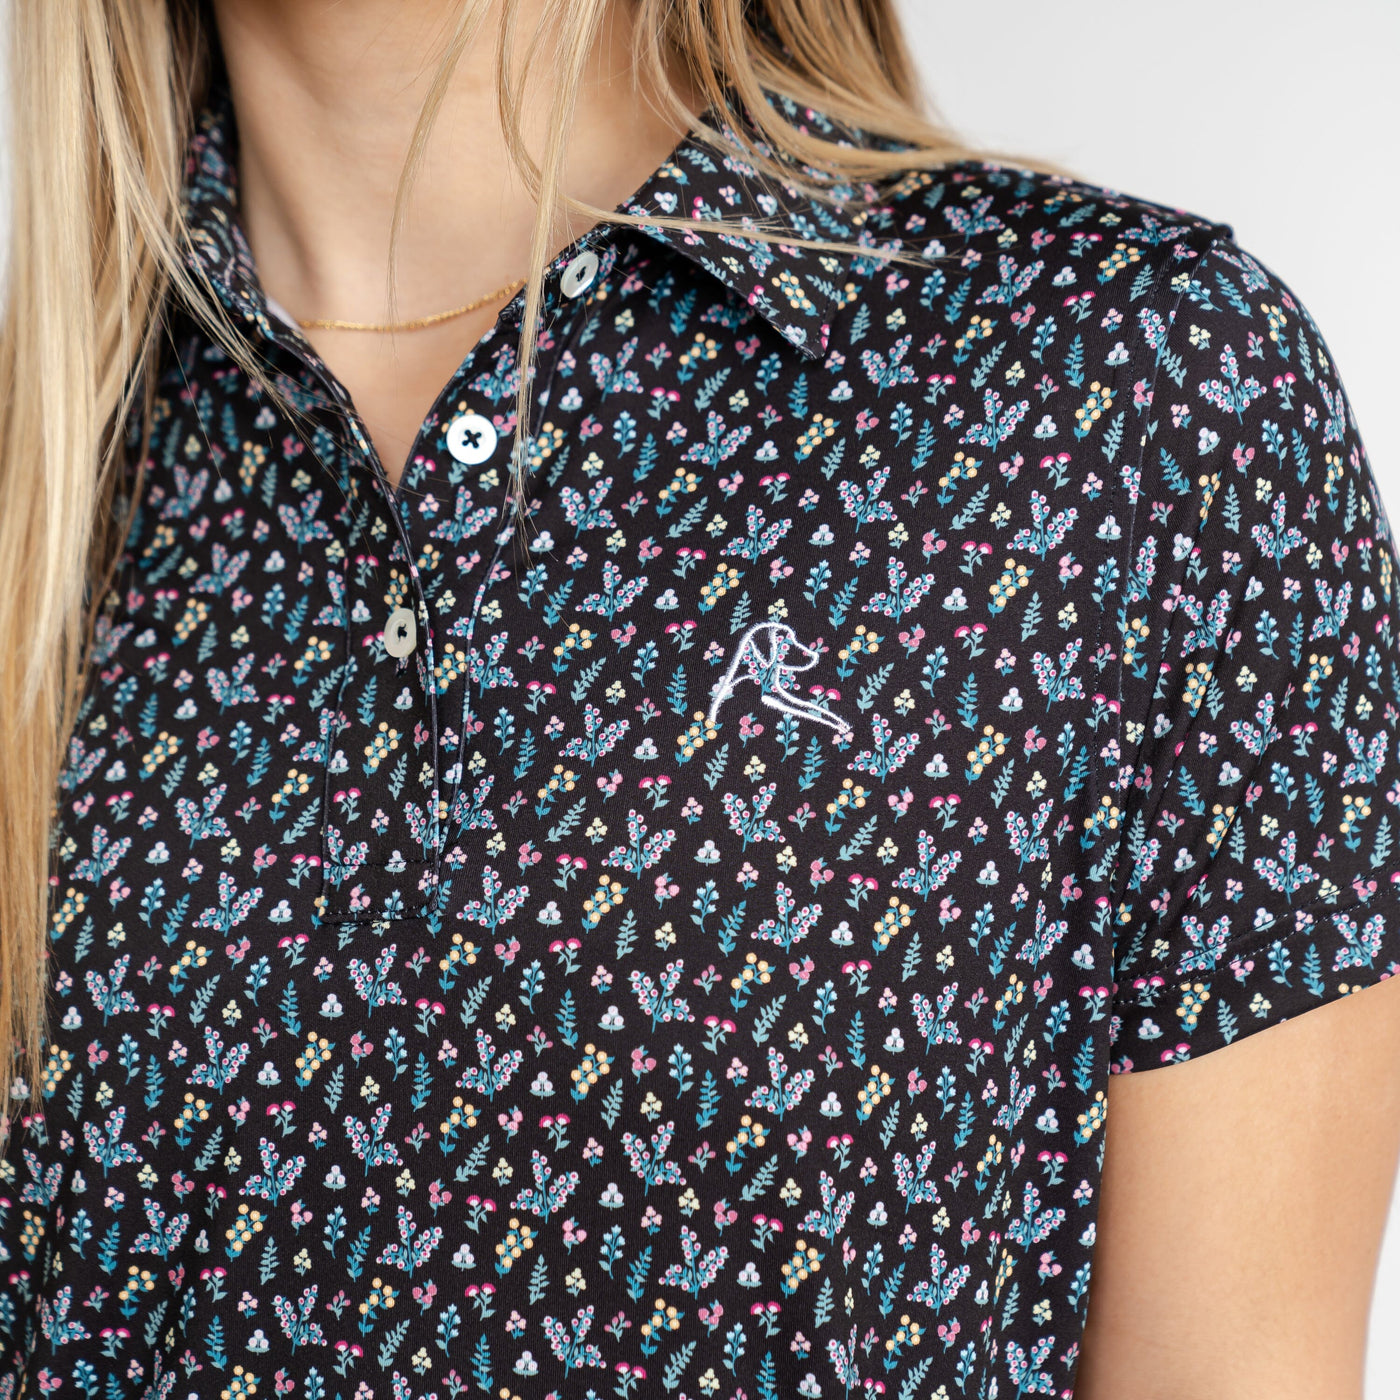 The Ditsy Floral (Women's) 1.0